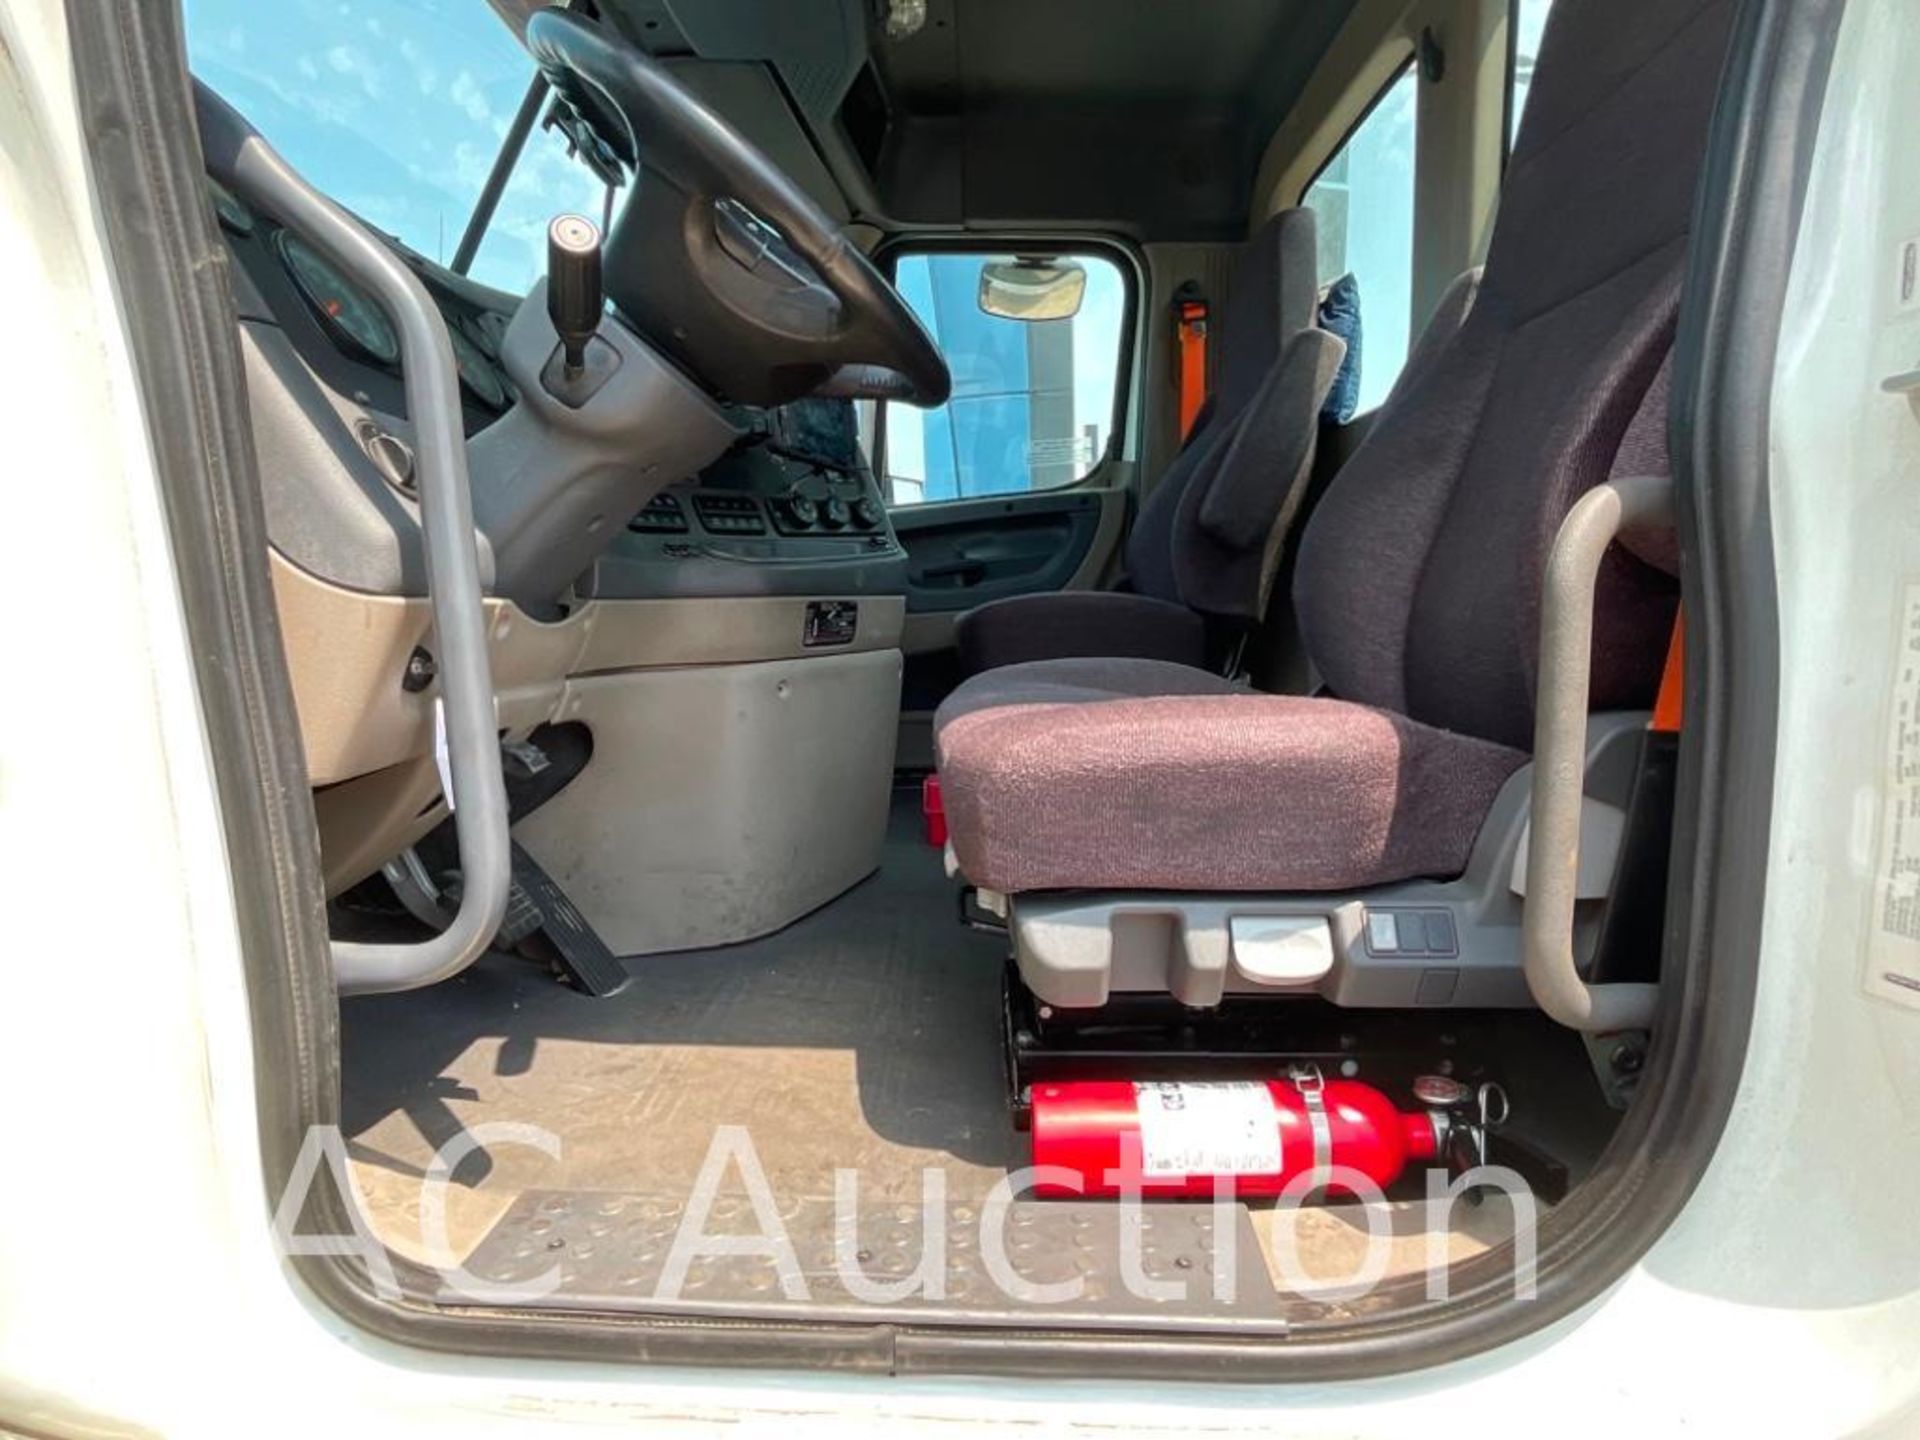 2020 Freightliner Cascadia Day Cab - Image 11 of 50